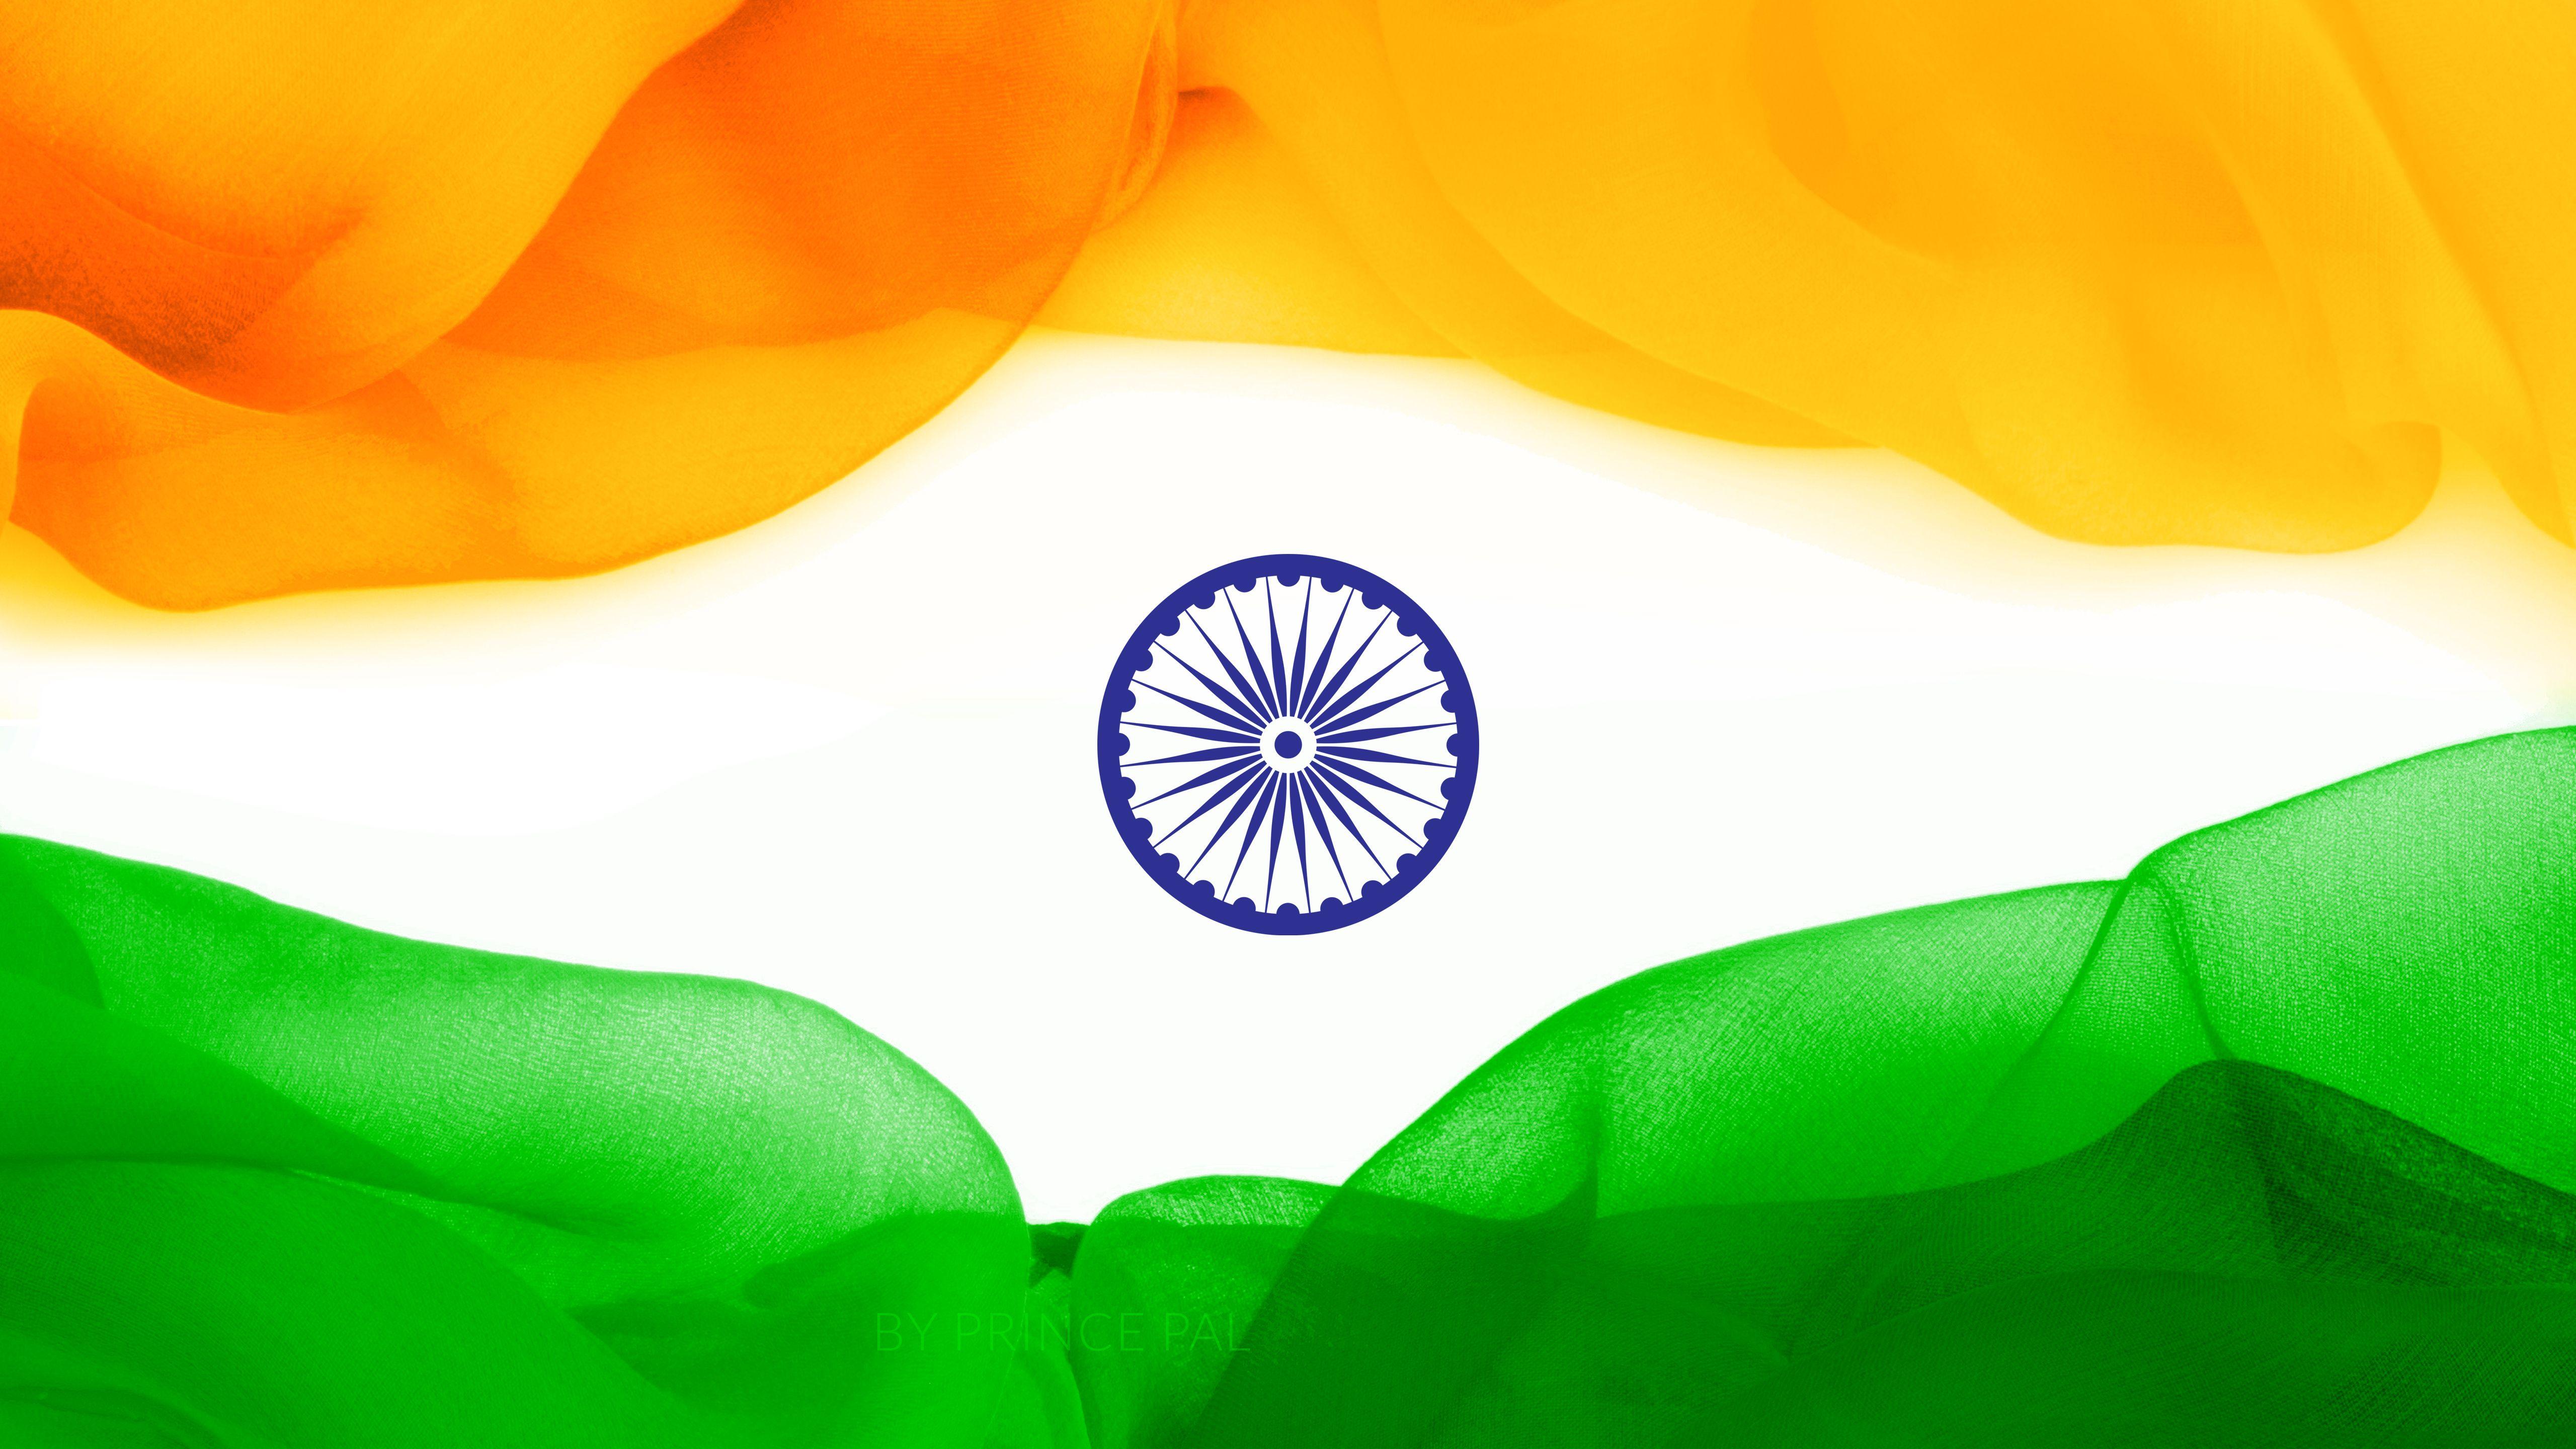 Indian National Flag Wallpapers 3d - Wallpaper Cave